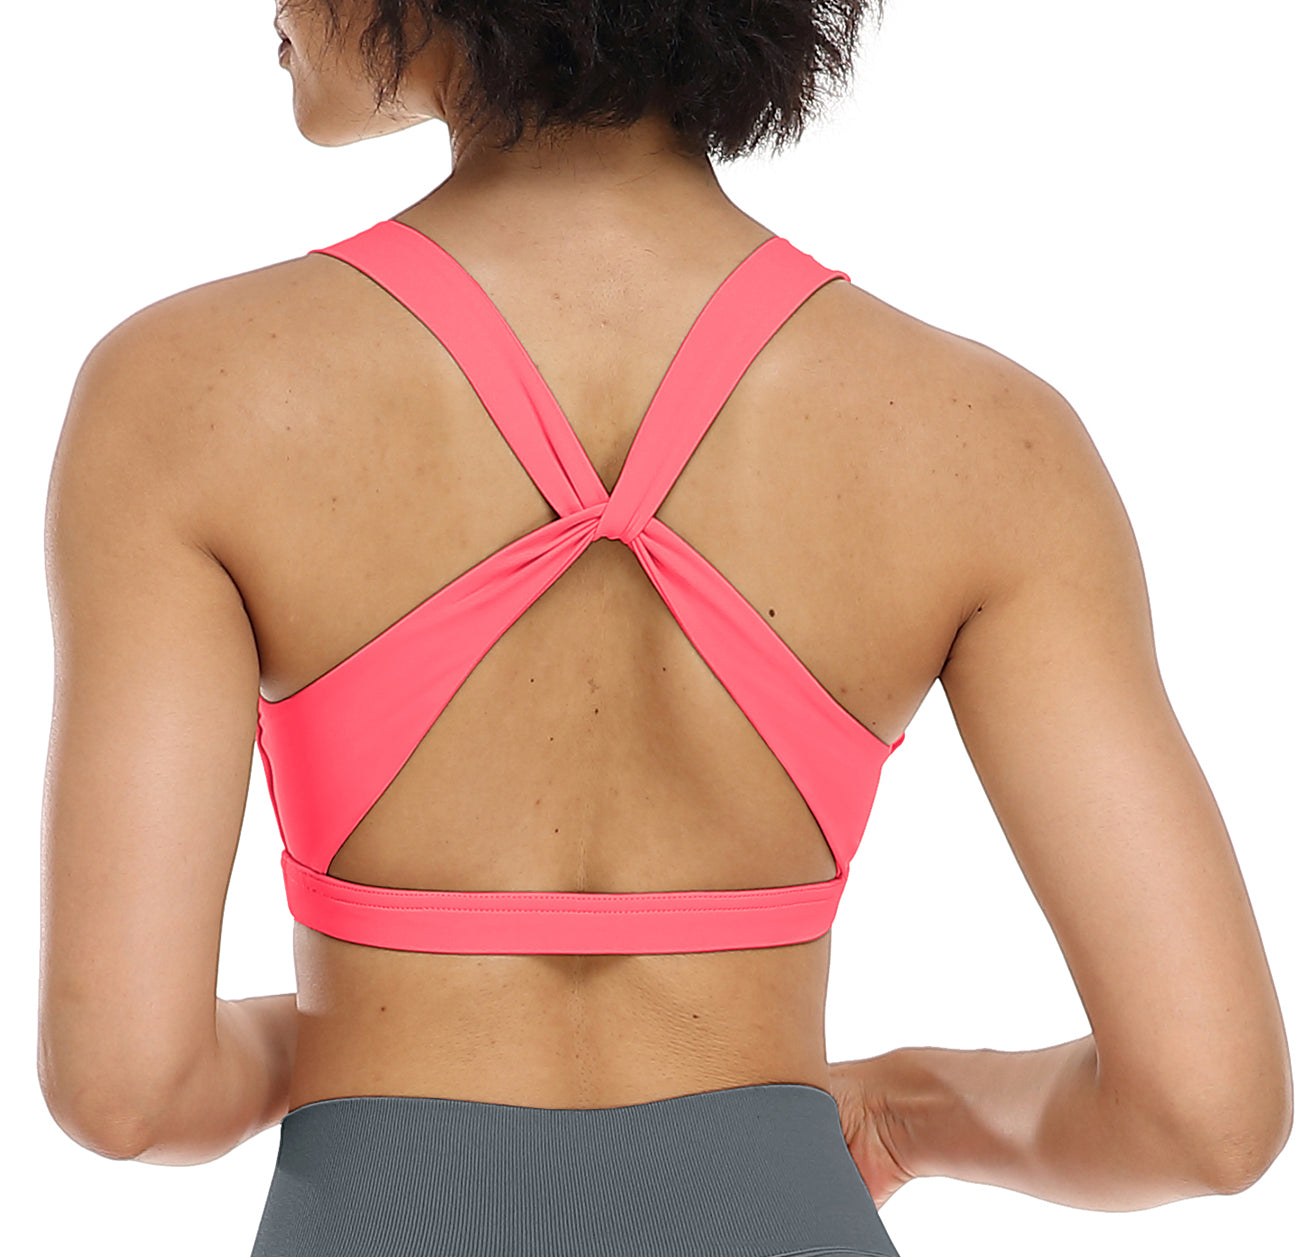 Women's Solid Color High Impact Sports Bras for Women Yoga Running